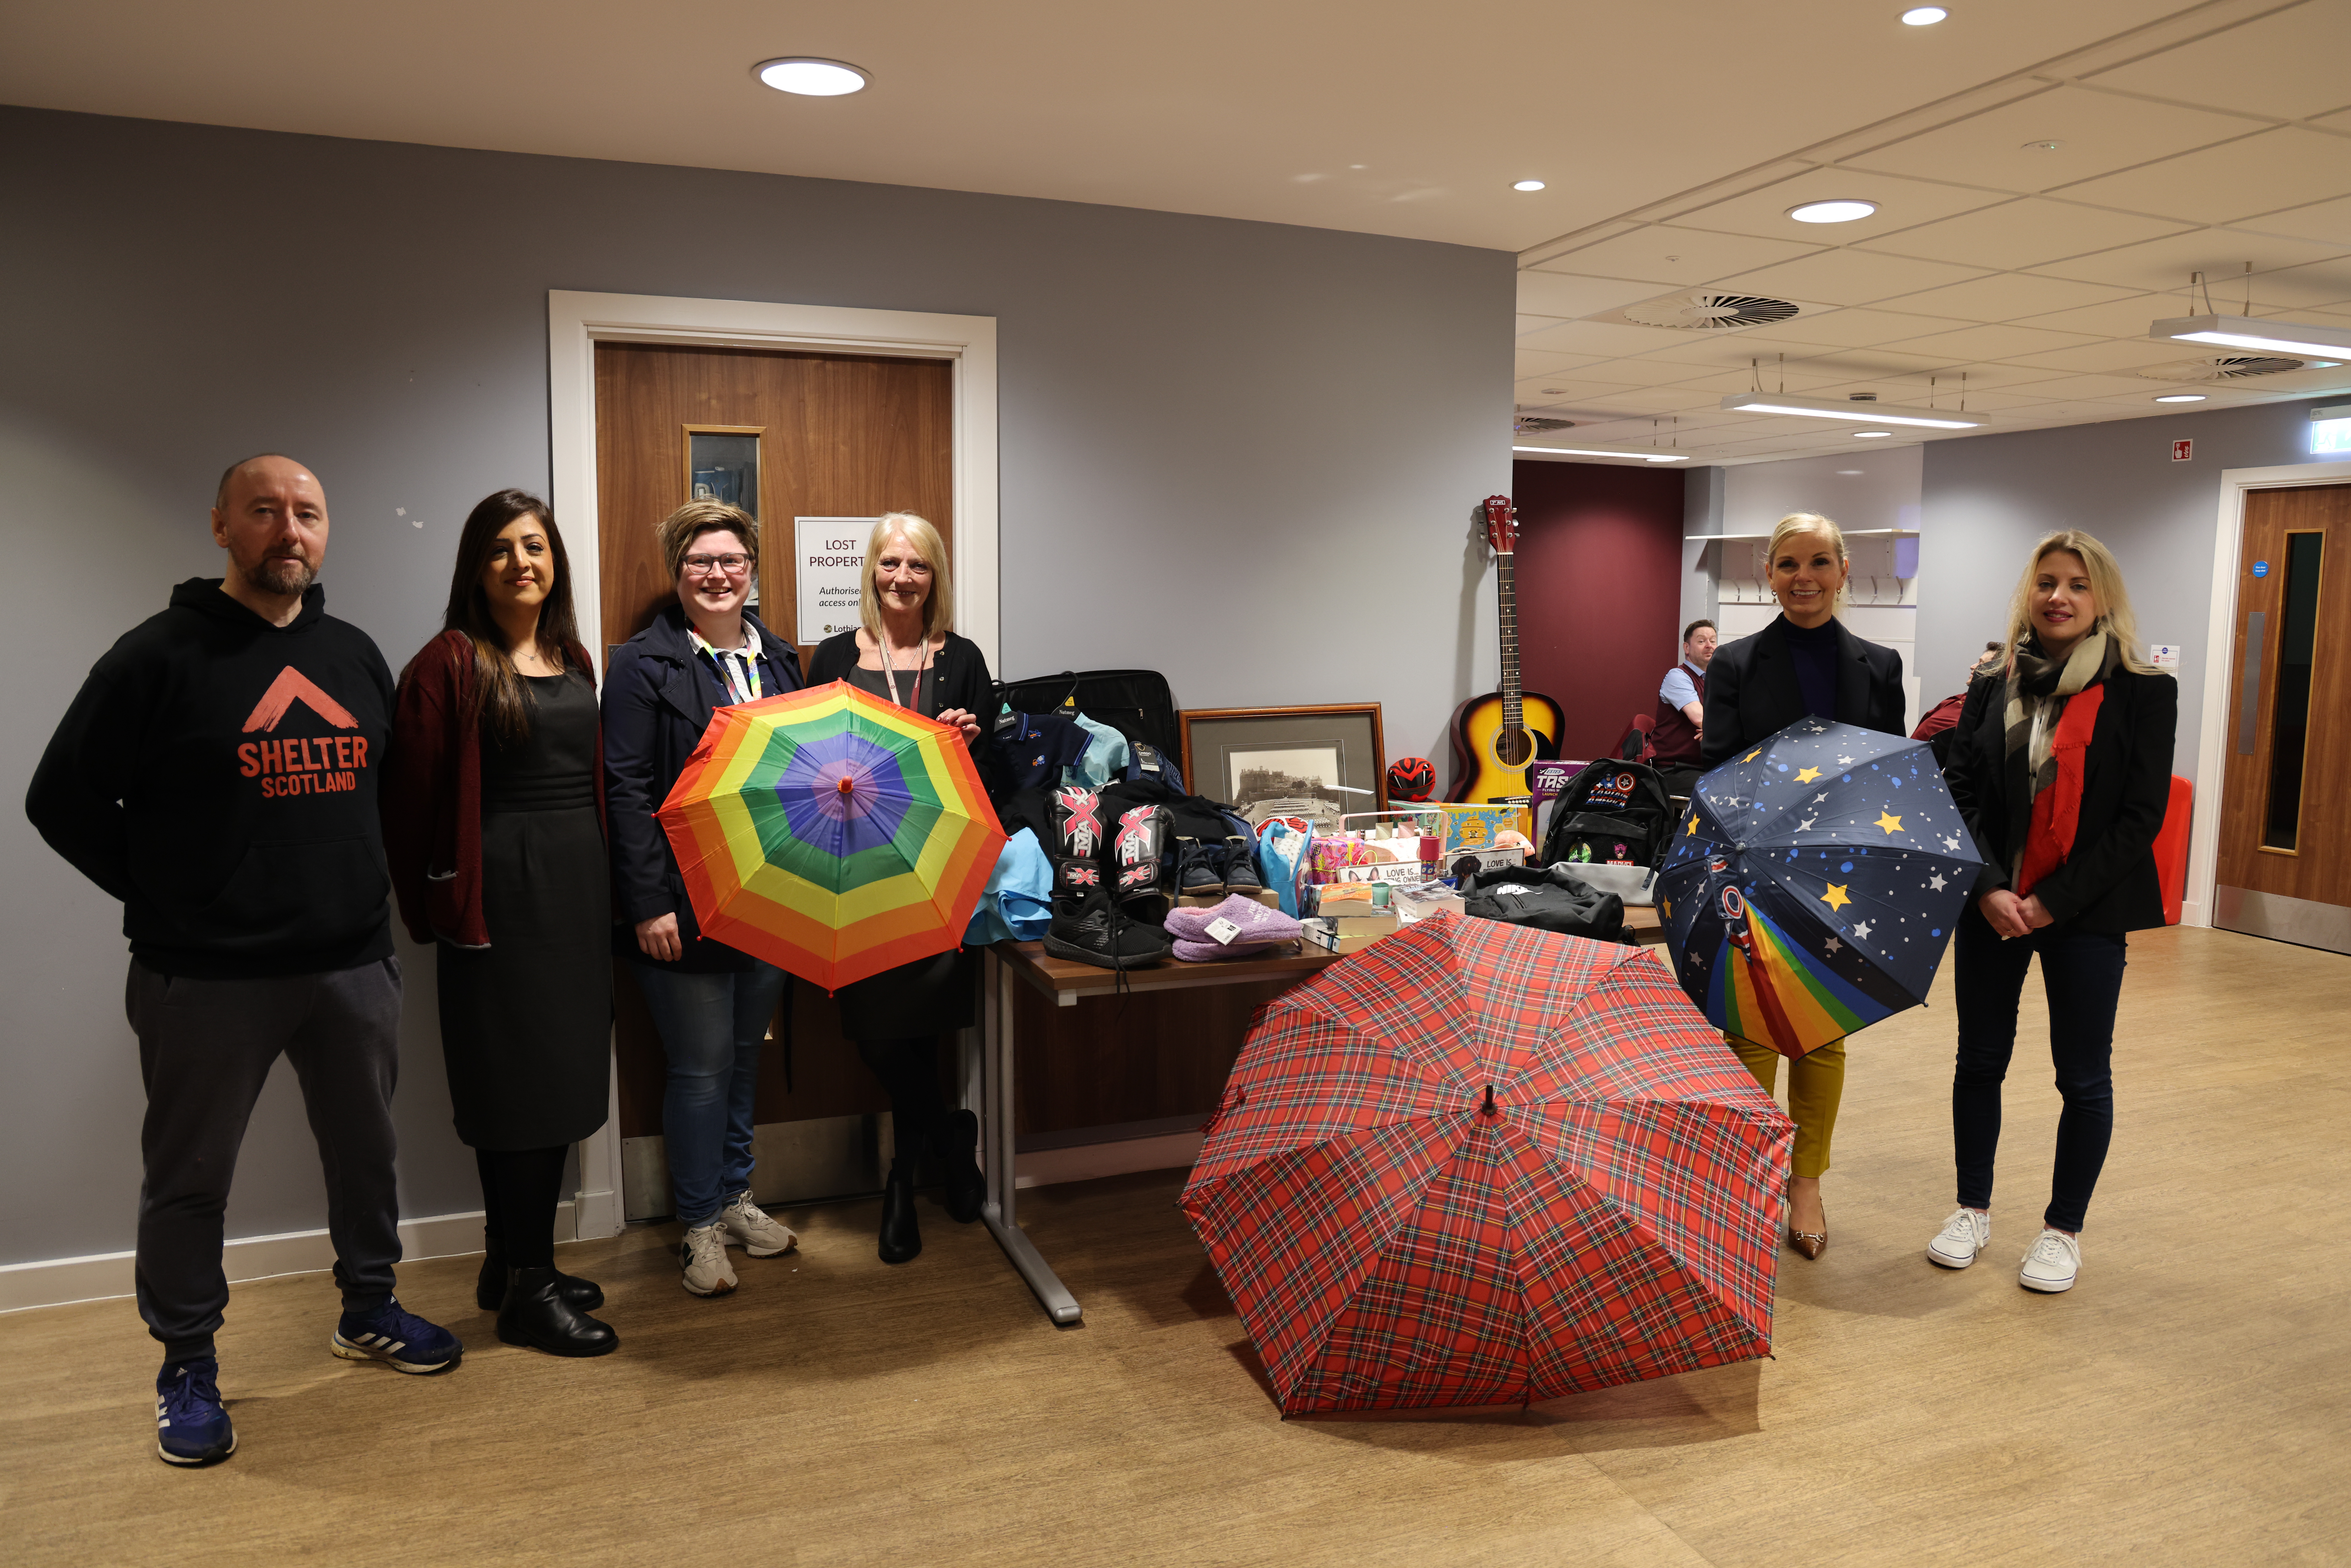 Lothian and Shelter Scotland announce new stock drive